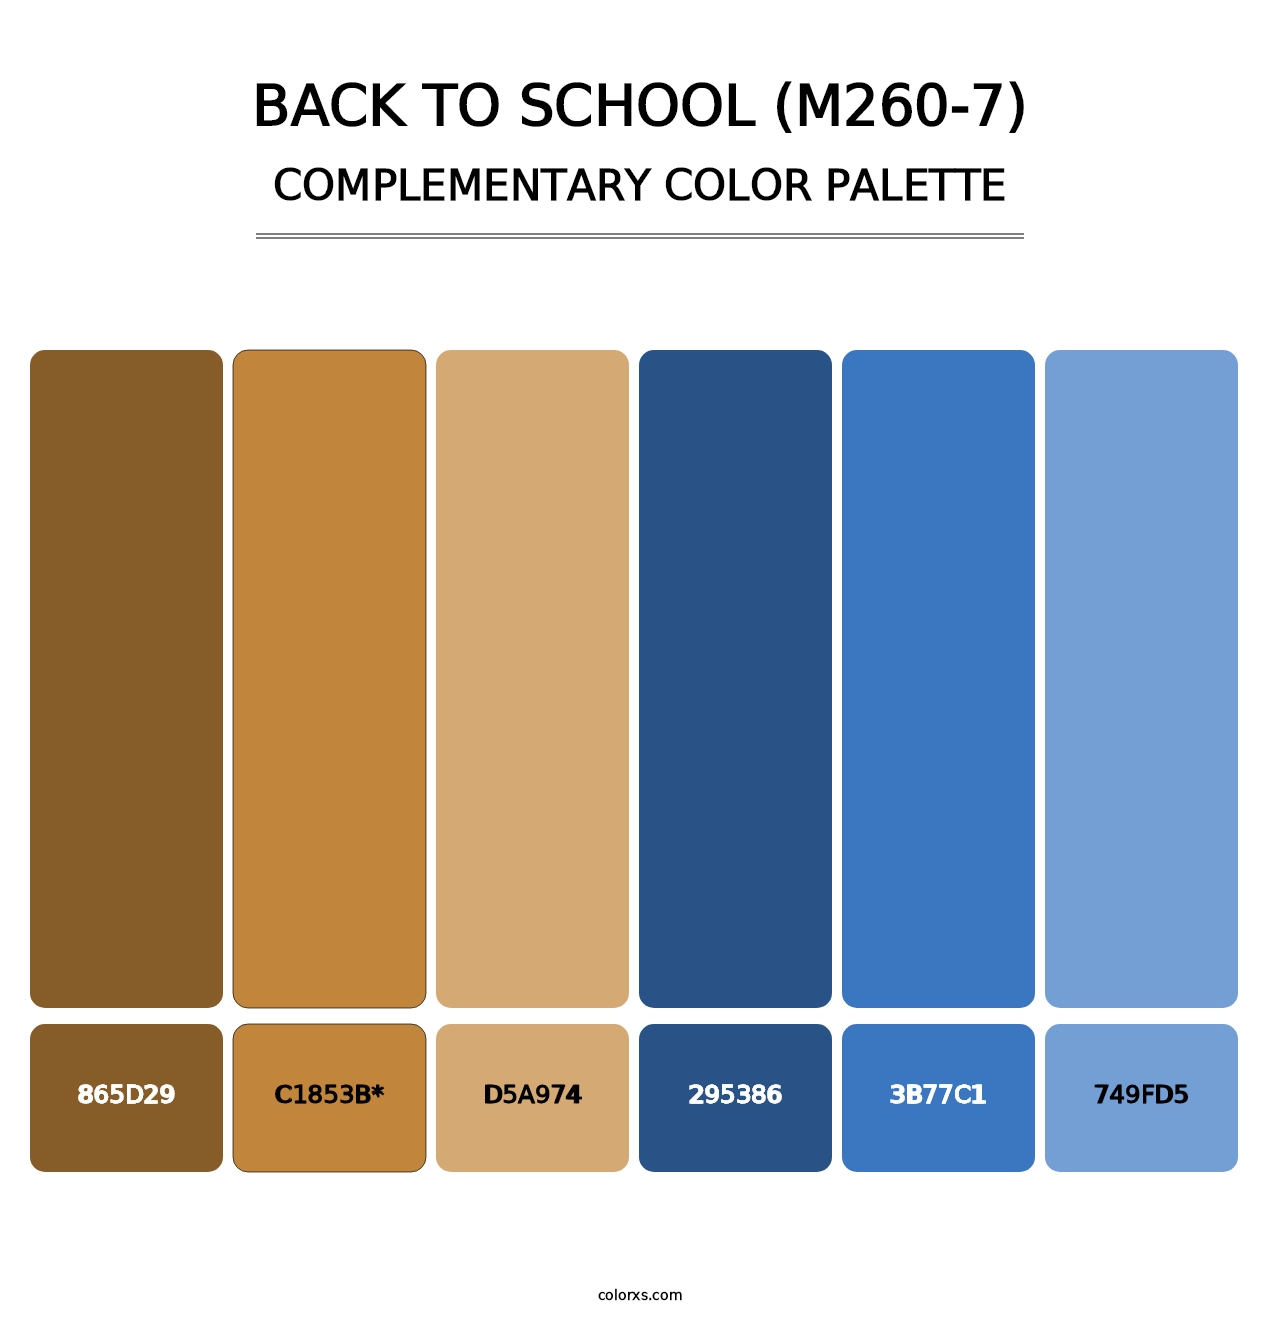 Back To School (M260-7) - Complementary Color Palette